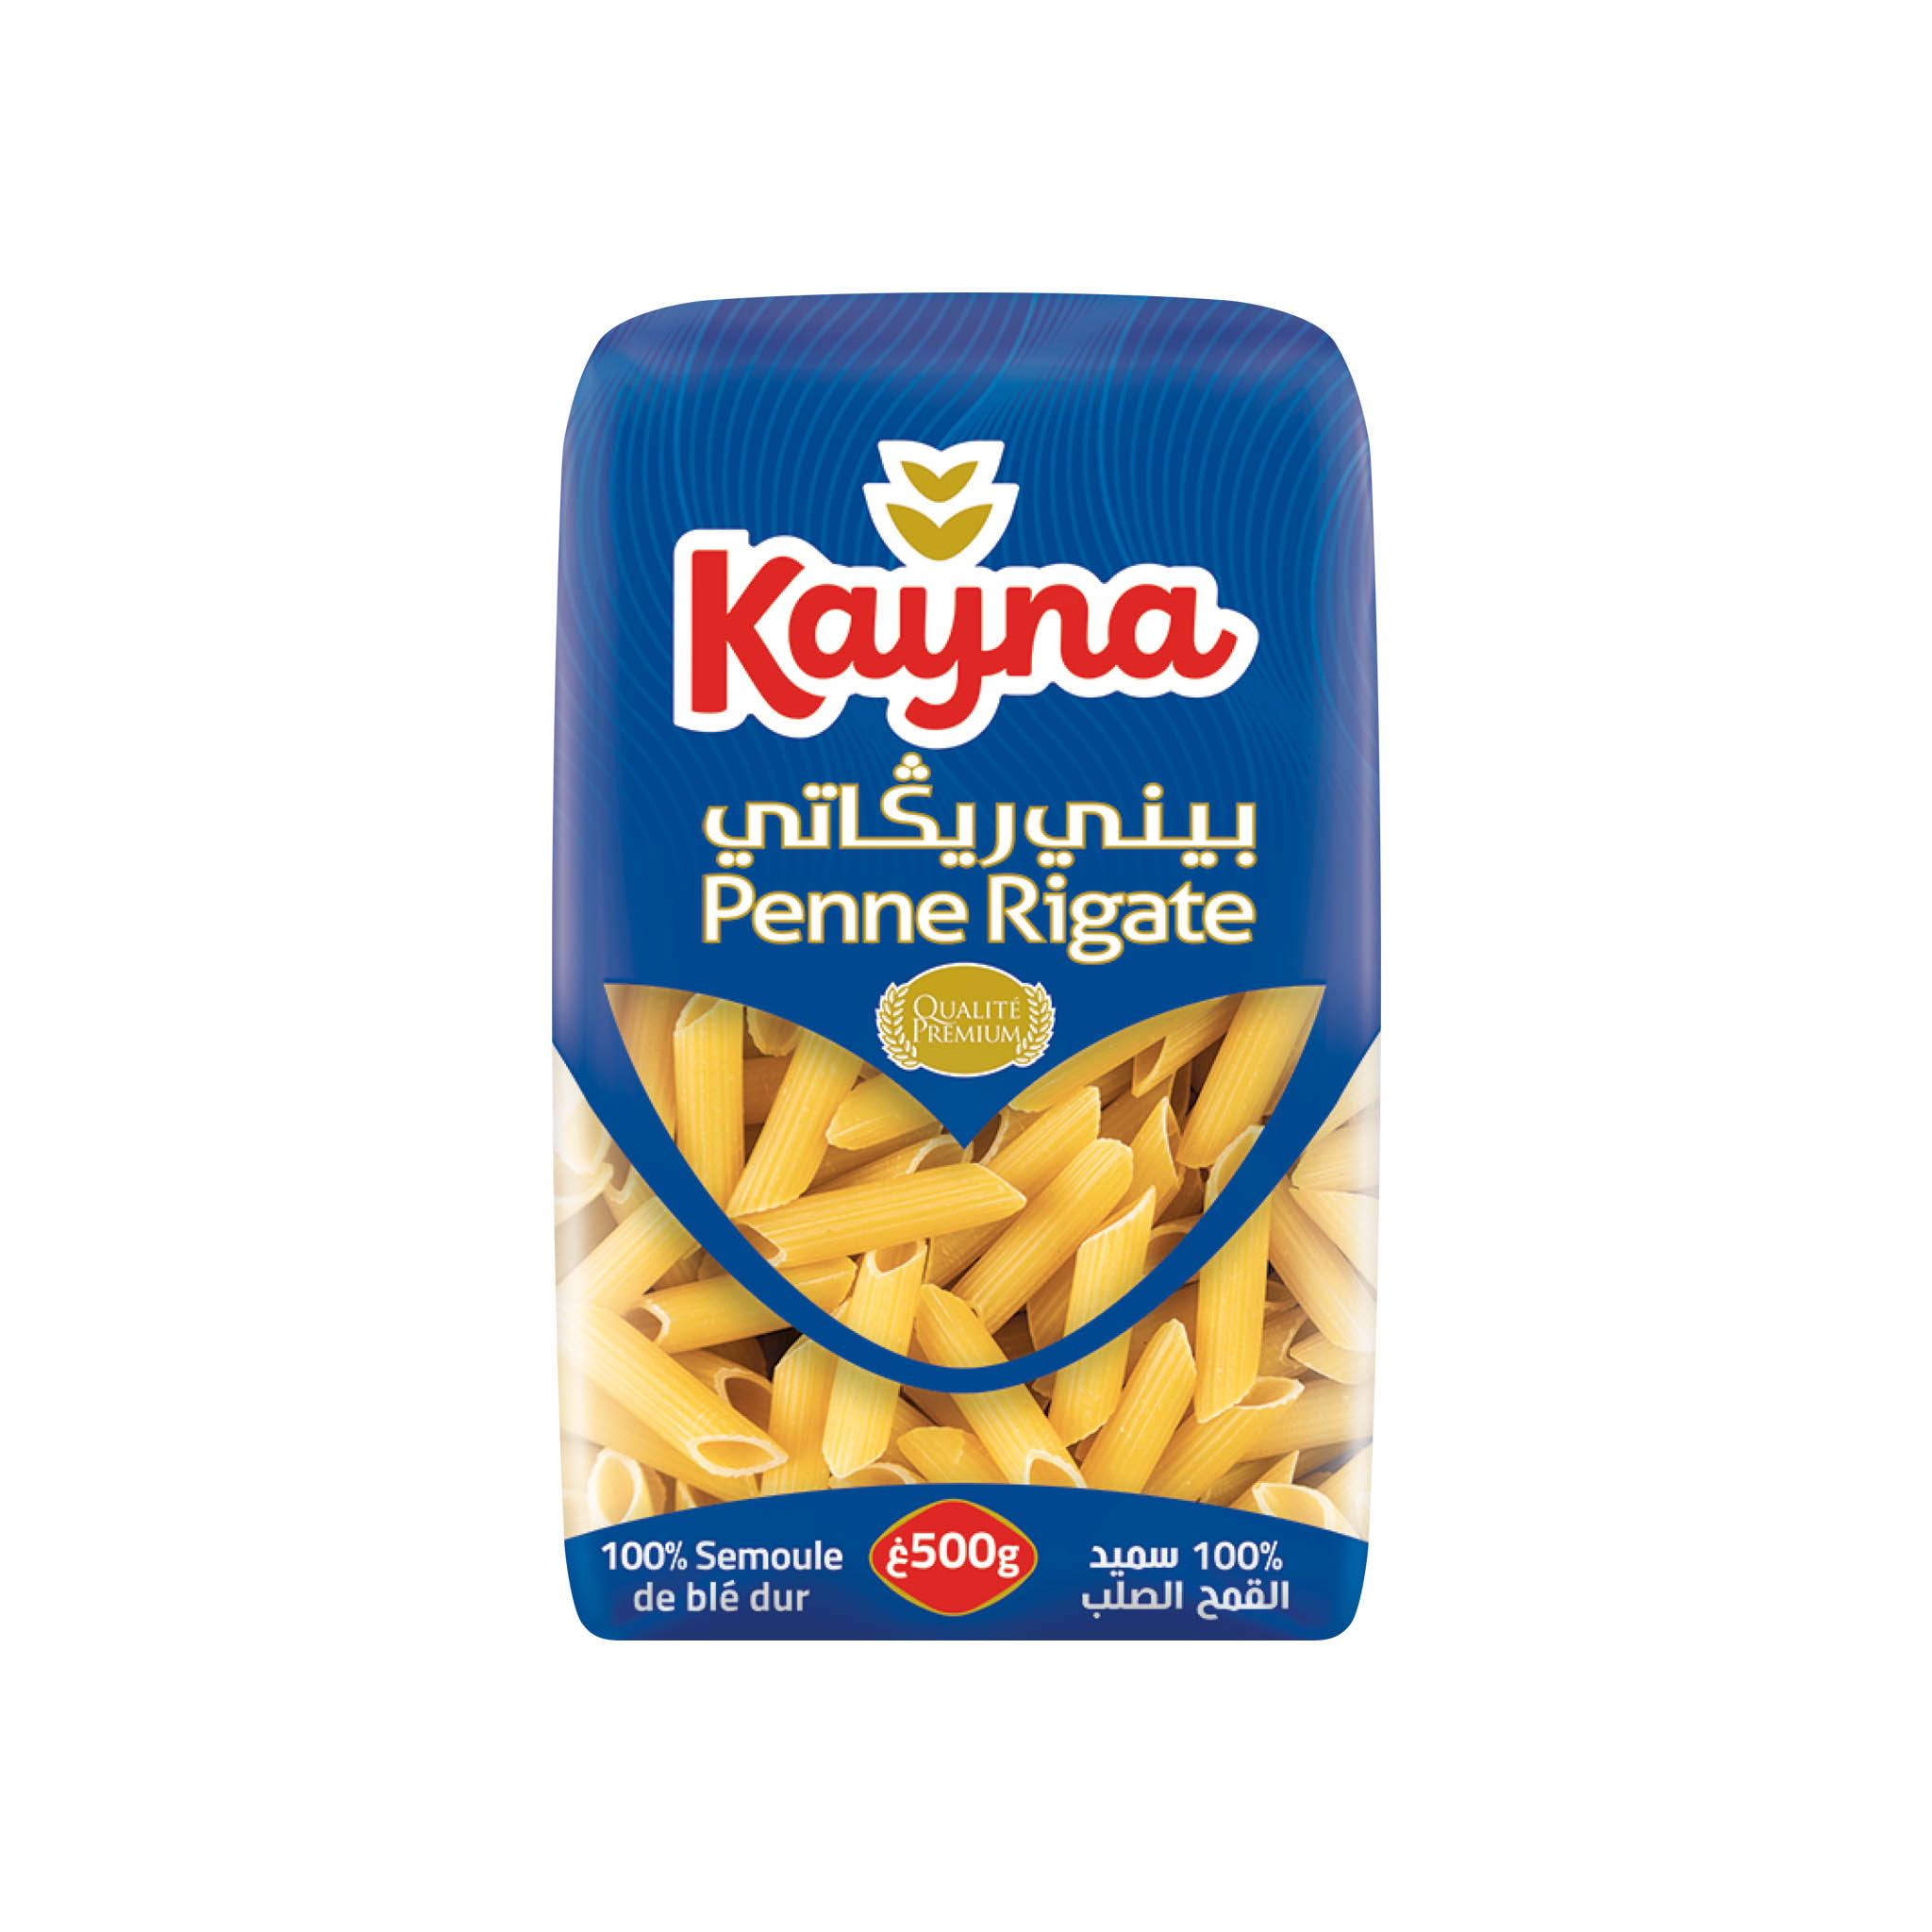 KAYNA Penne Rigate 500g - PRODUCT